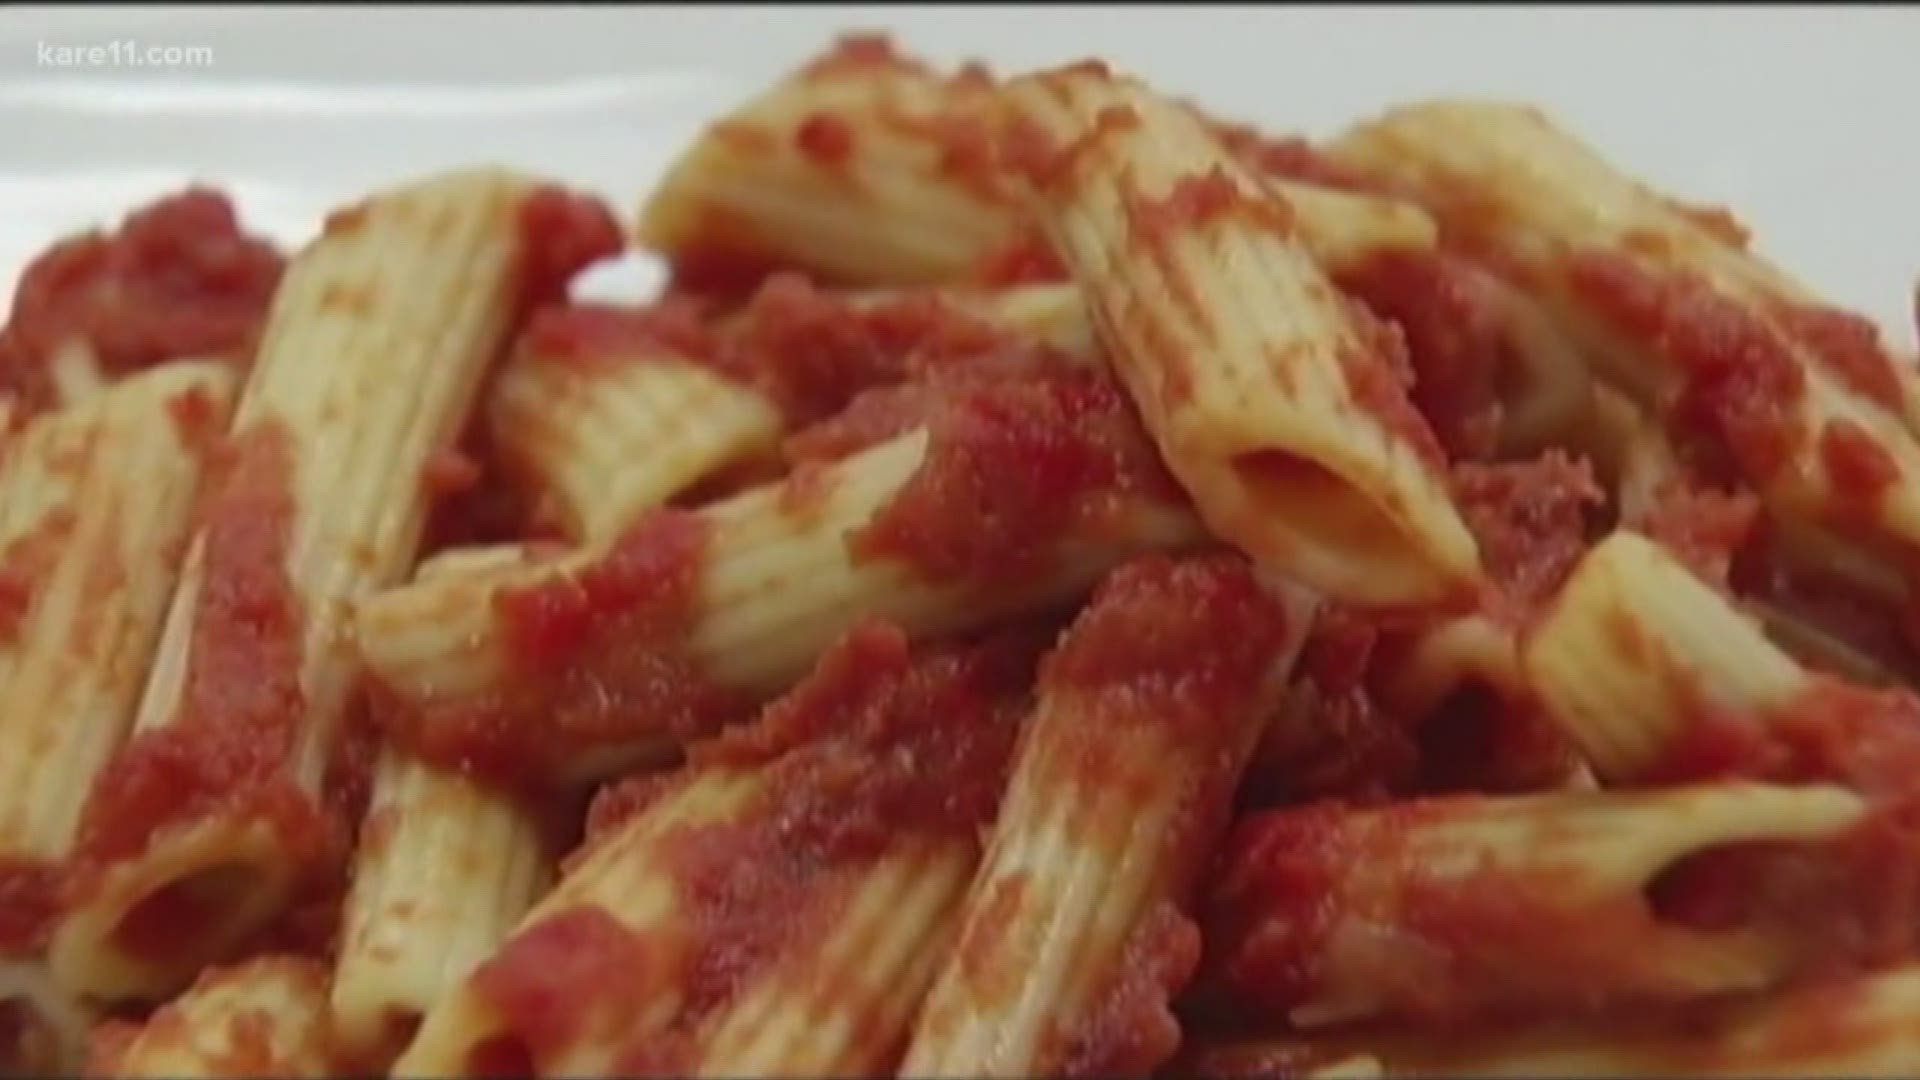 A new vaccine is in the works that might let you eat all the pasta and bread you want.